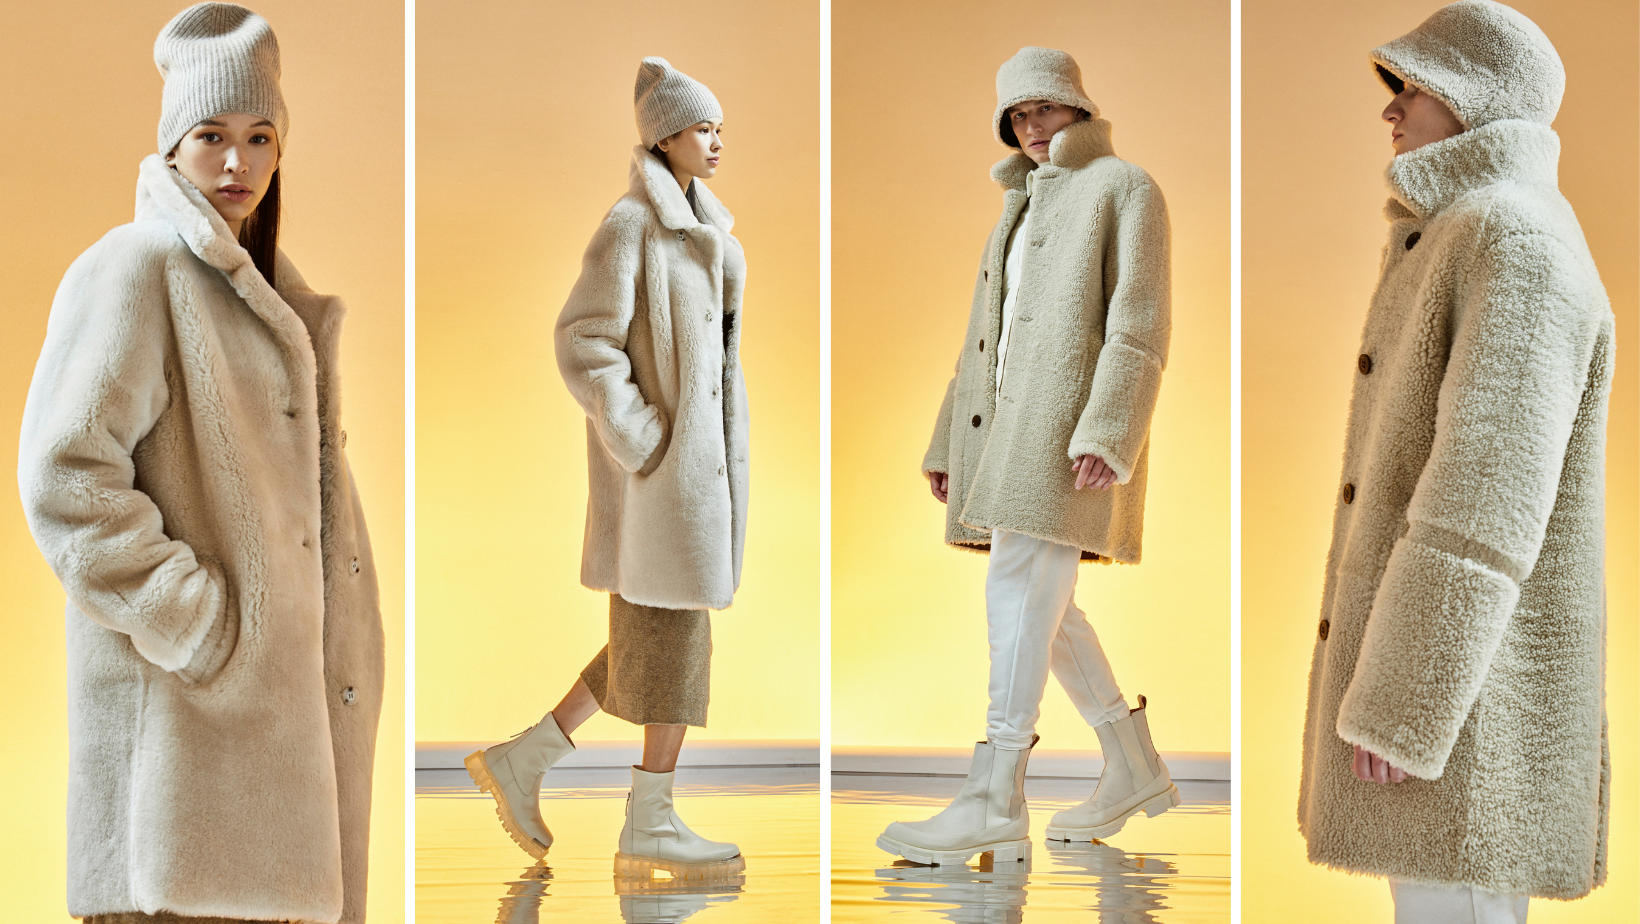 From left to right; Moody: This three-quarter length genuine shearling jacket will become your go-to layer for cold-weather. Keep warm with plush this plush genuine shearling sheepskin and add a layer of visibly soft impact to your look. Johntey: Wool out medium length coat Regular fit Single breasted Stand collar with short lapel Interior zip pocket.